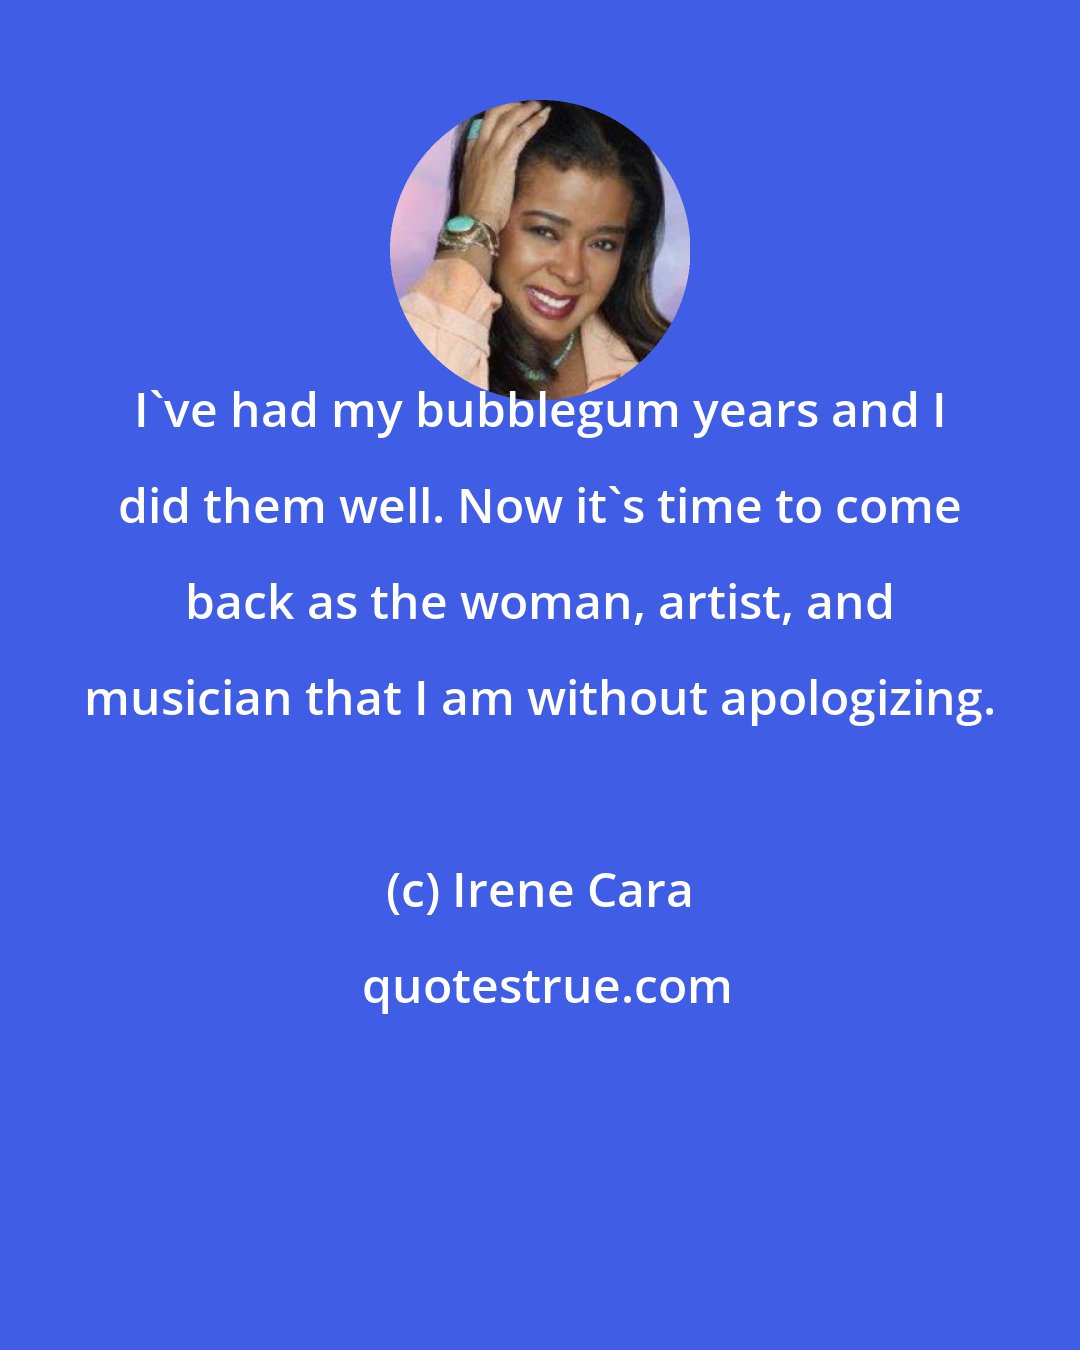 Irene Cara: I've had my bubblegum years and I did them well. Now it's time to come back as the woman, artist, and musician that I am without apologizing.